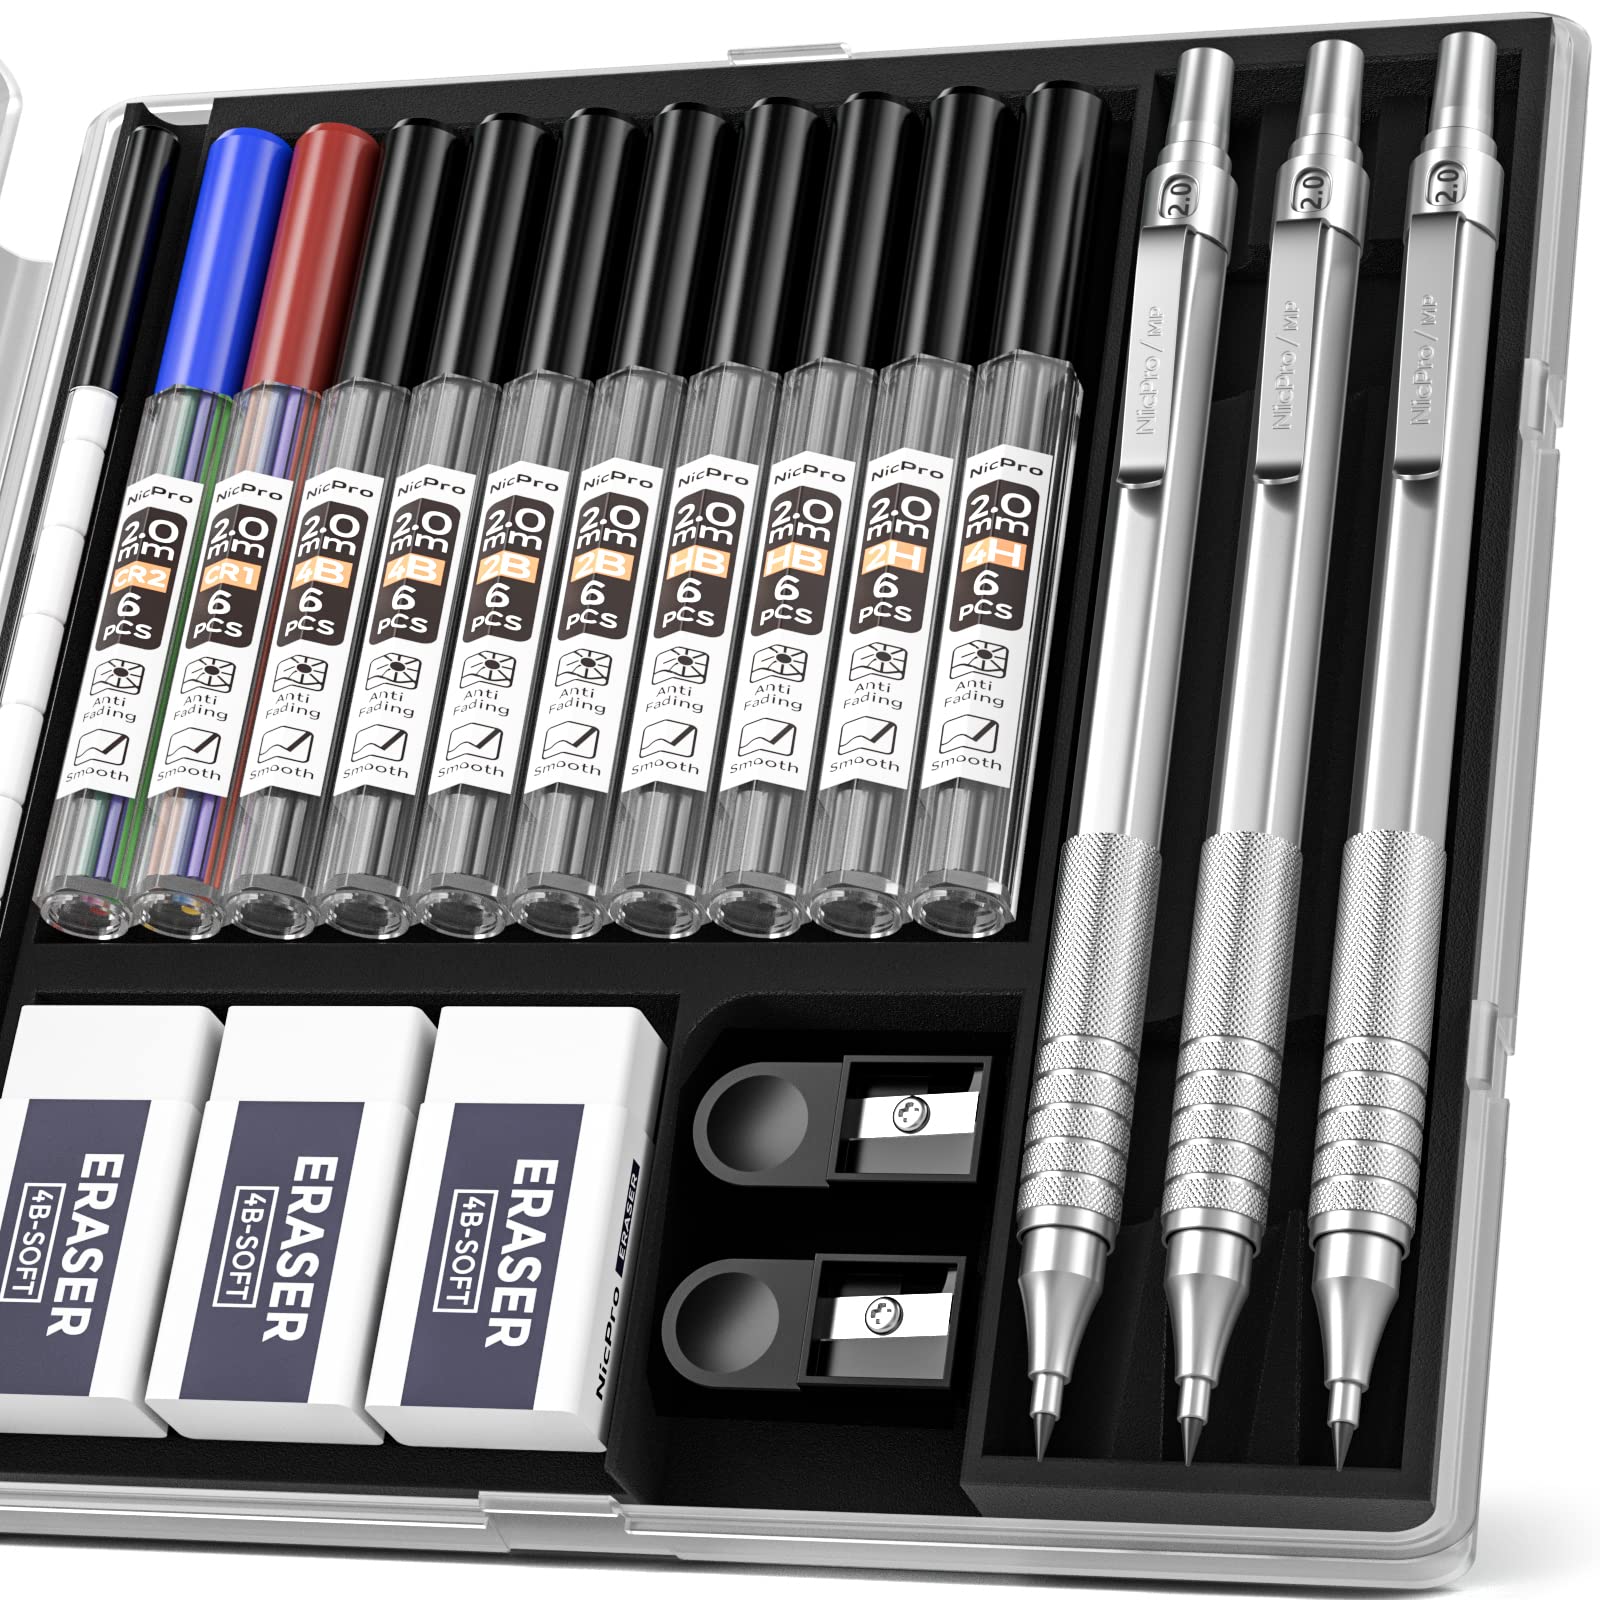 Nicpro Metal 2.0 Mechanical Pencil Set with Case, 3 PCS Drafting Lead